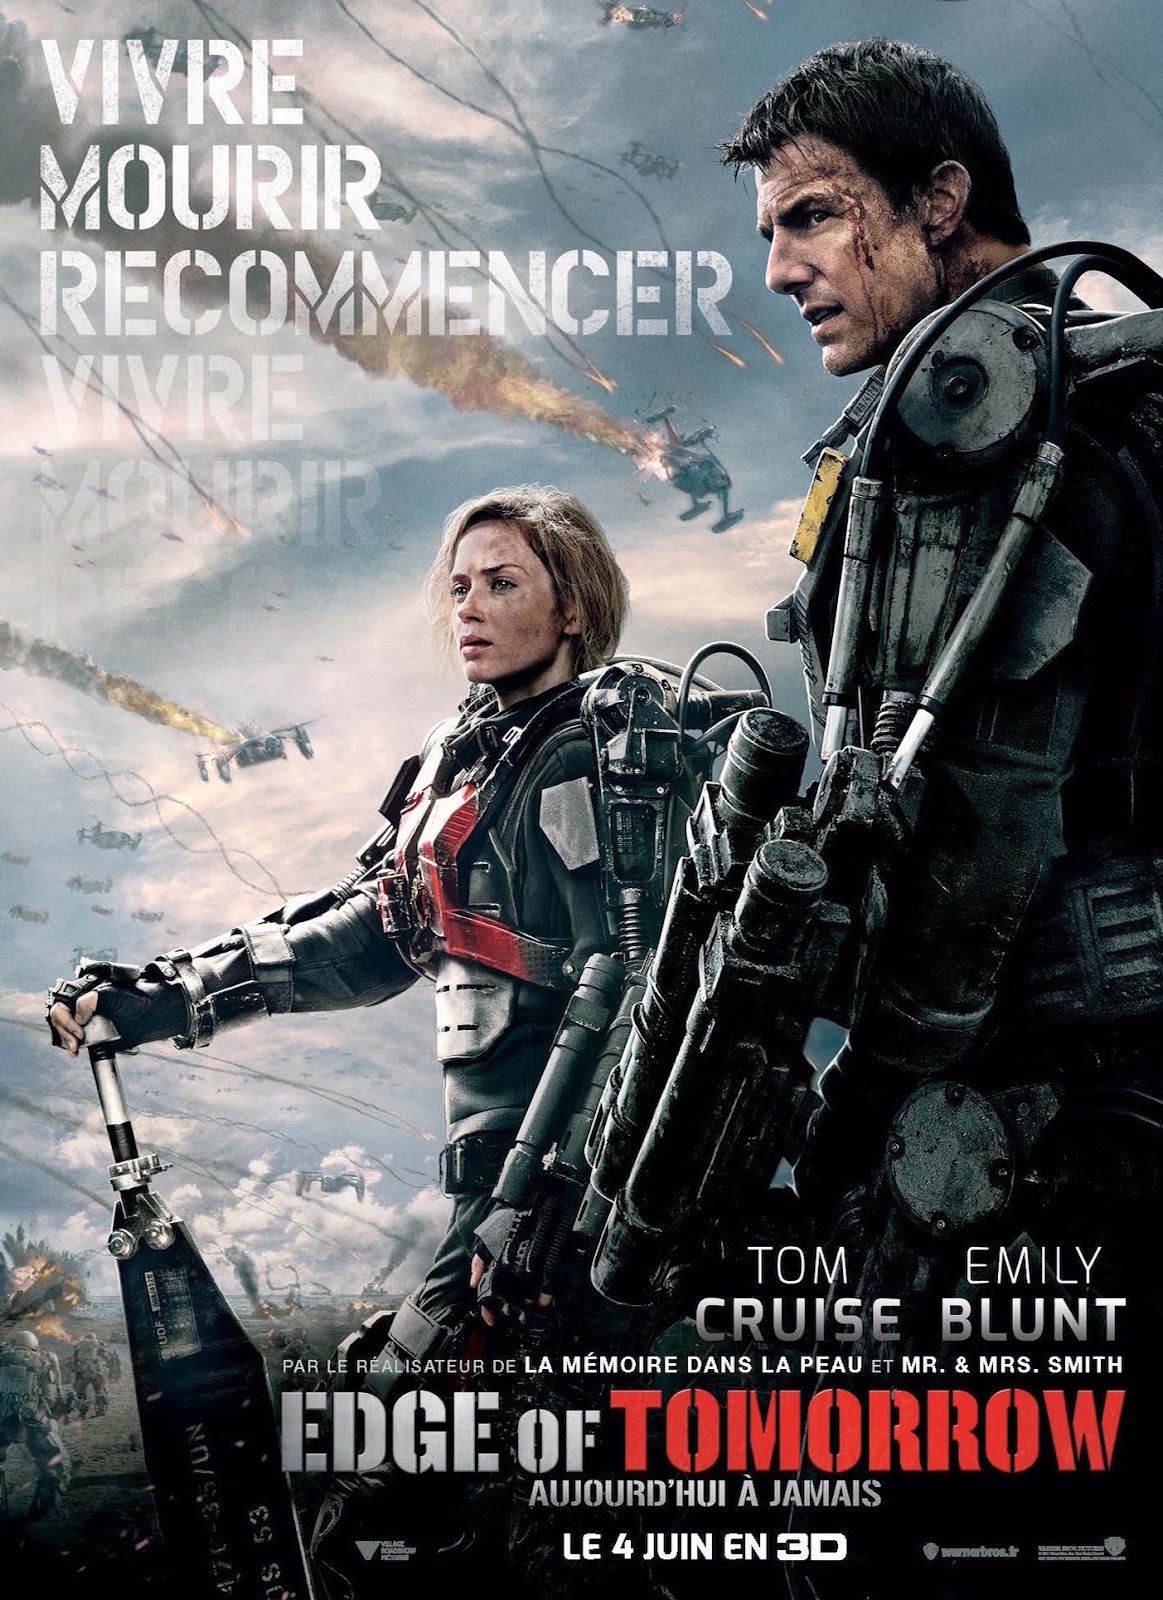 Edge of Tomorrow - Film (2014) streaming VF gratuit complet